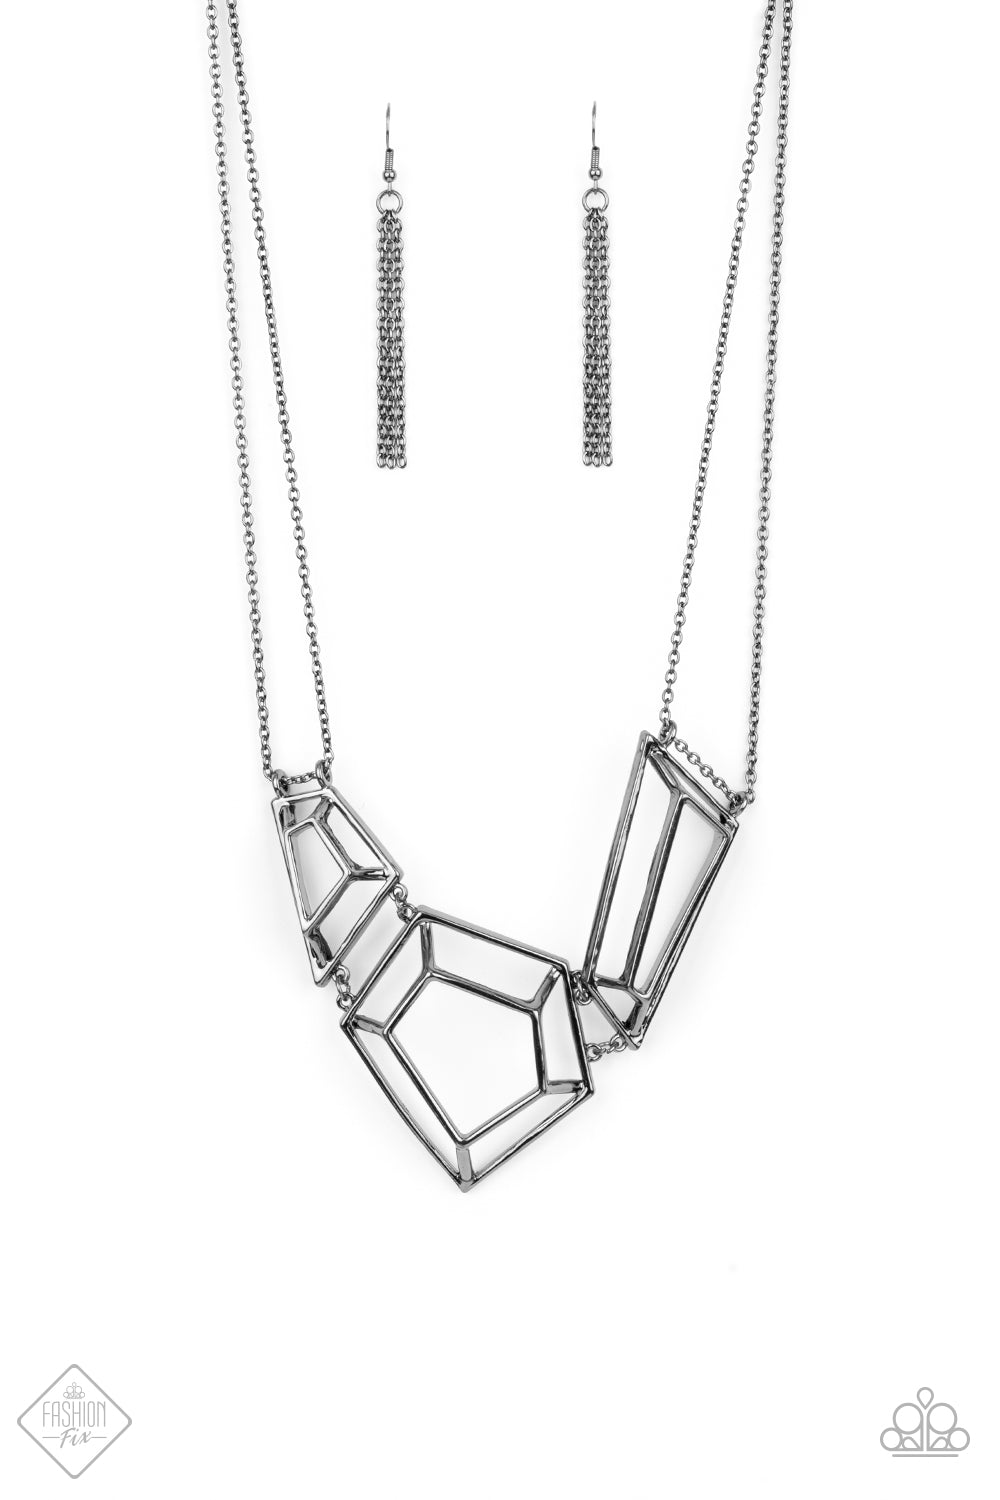 ​3-D Drama - Black Metal Necklace -  Paparazzi Accessories - Glistening gunmetal bars connect into edgy 3-dimensional frames below the collar, creating a bold geometric statement fashion necklace. Features an adjustable clasp closure. Sold as one individual necklace.